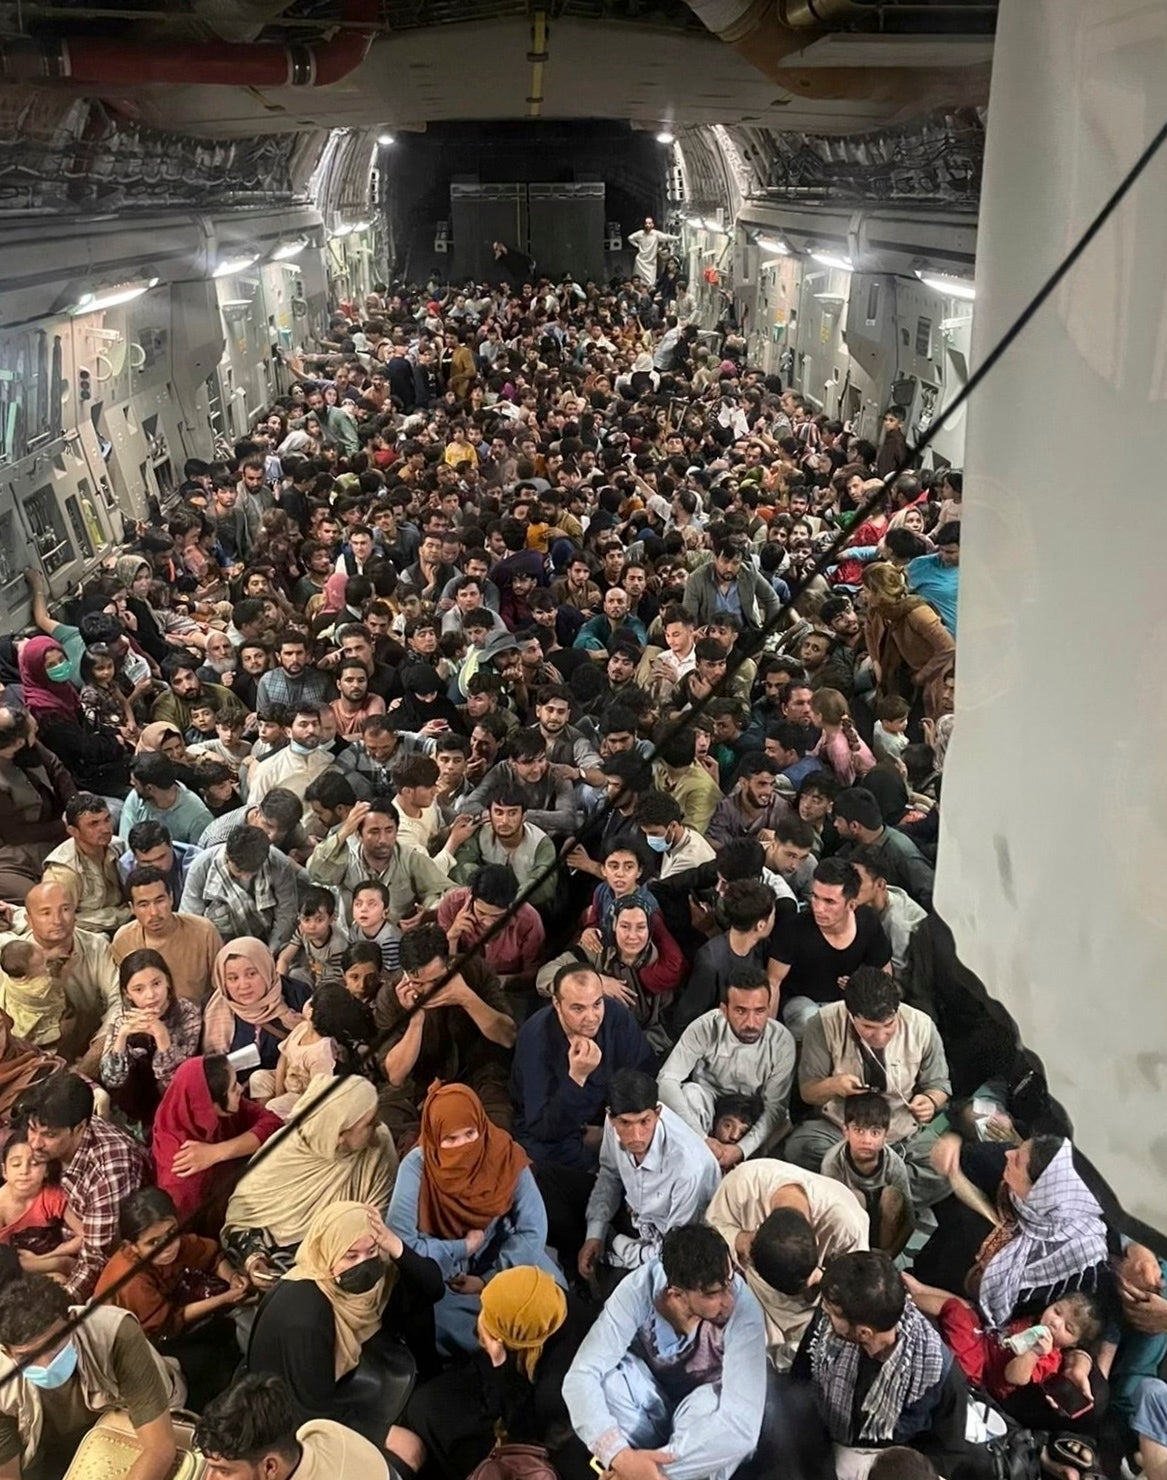 About 640 Afghan nationals evacuated on an US Air Force C-17 Globemaster III airplane